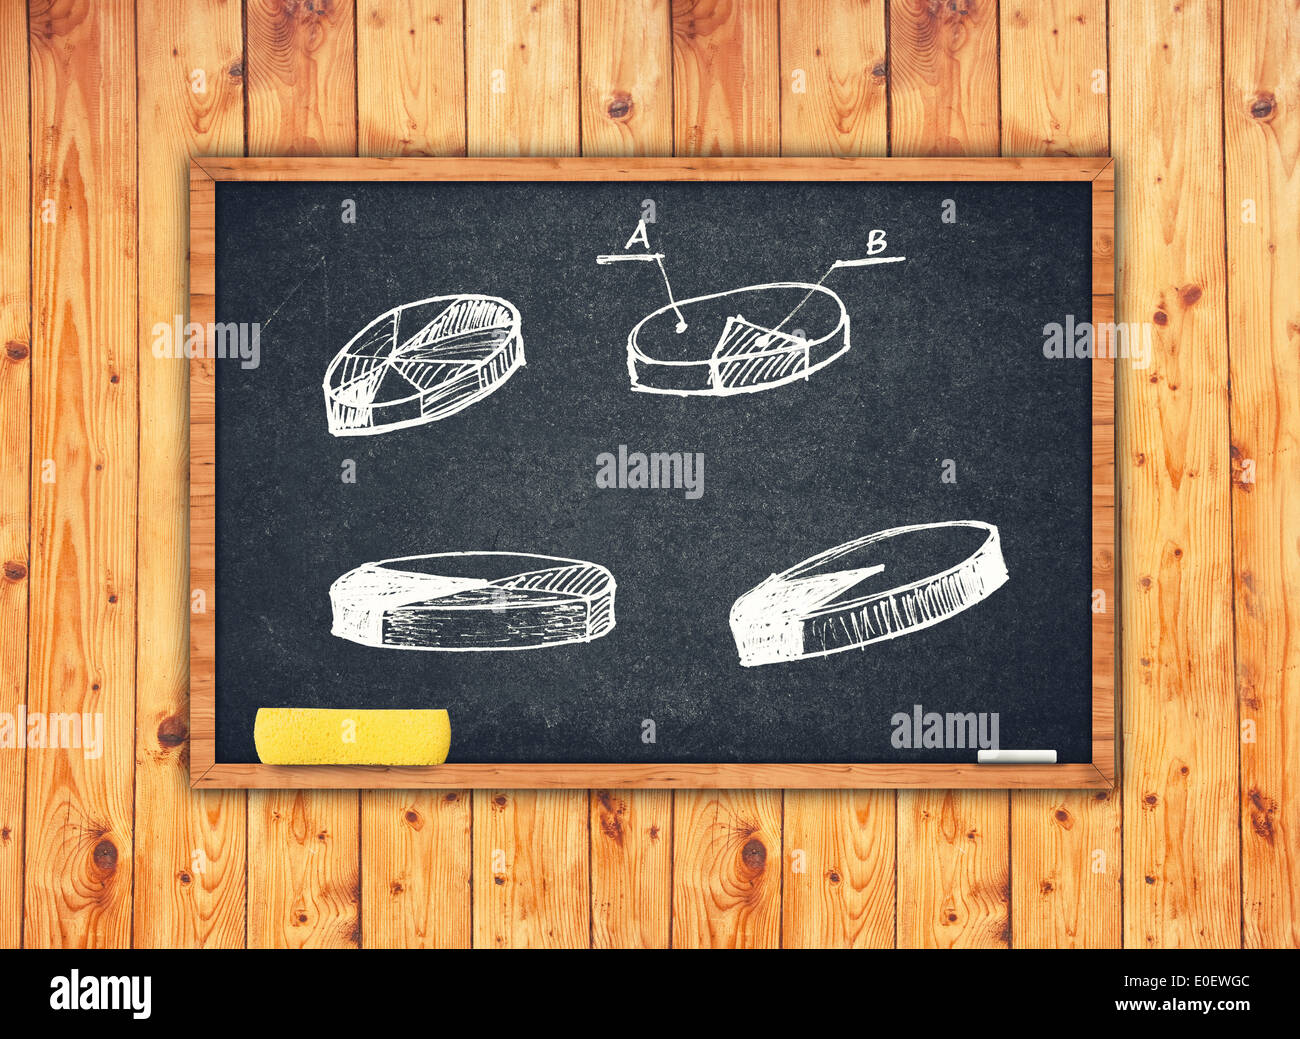 Pie charts and other infographics on chalkboard. Concept of presenting information with charts. Stock Photo